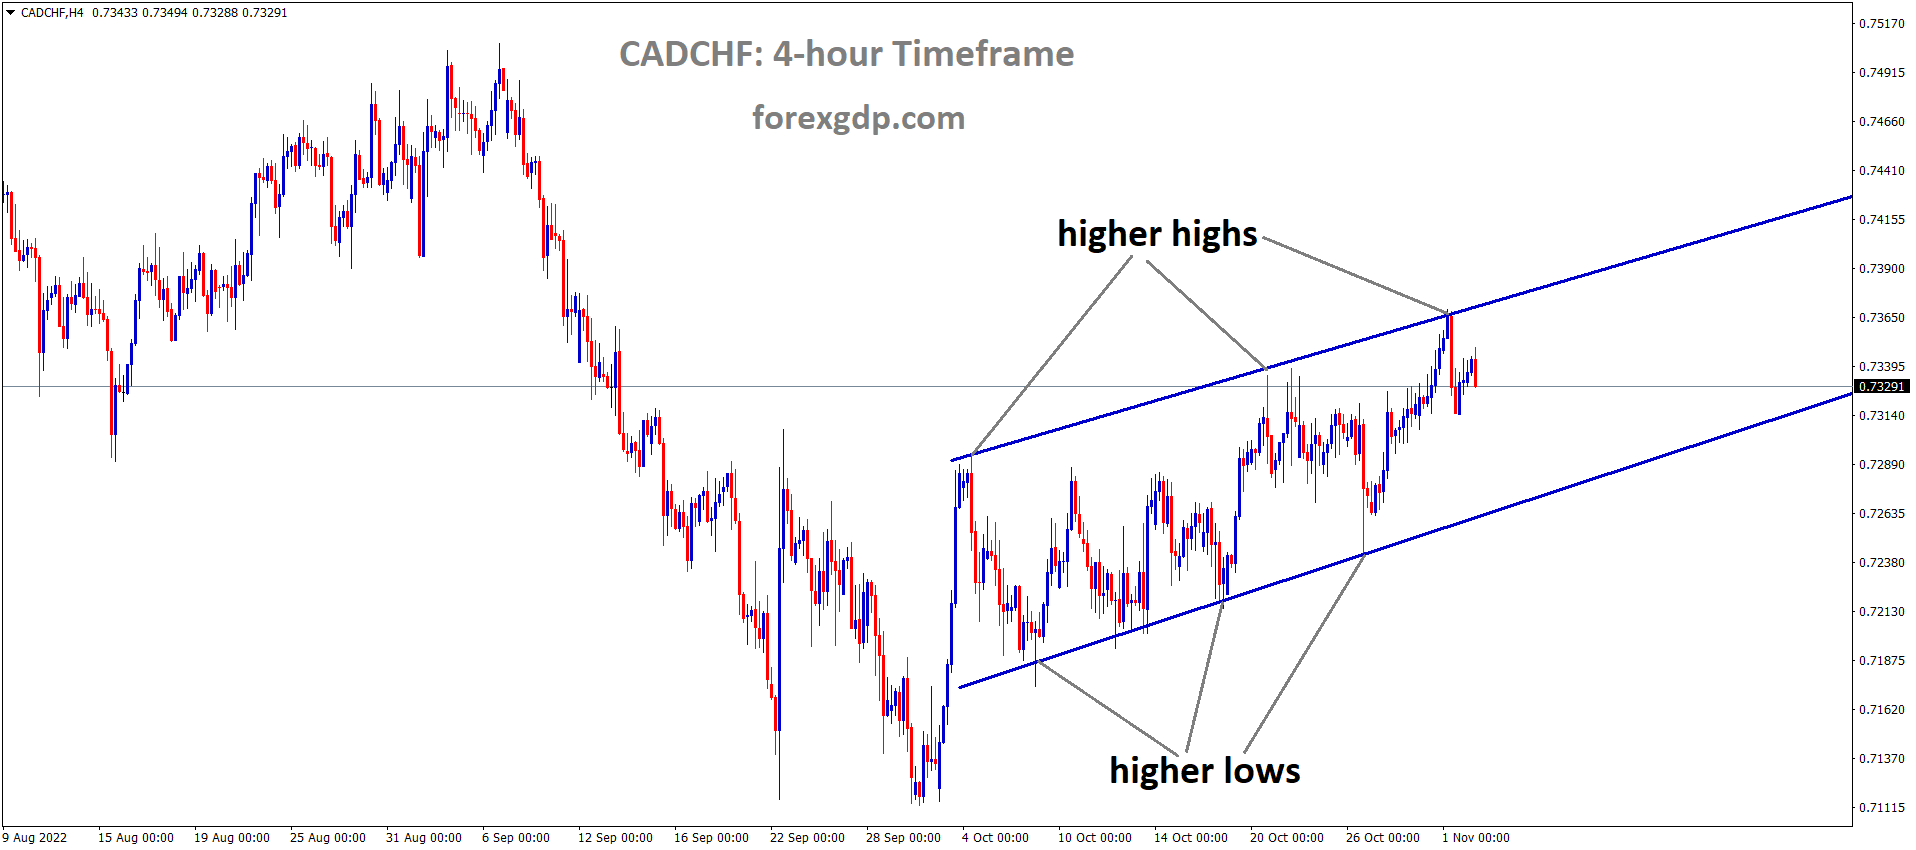 CADCHF is moving in an Ascending channel and the market has fallen from the higher high area of the channel